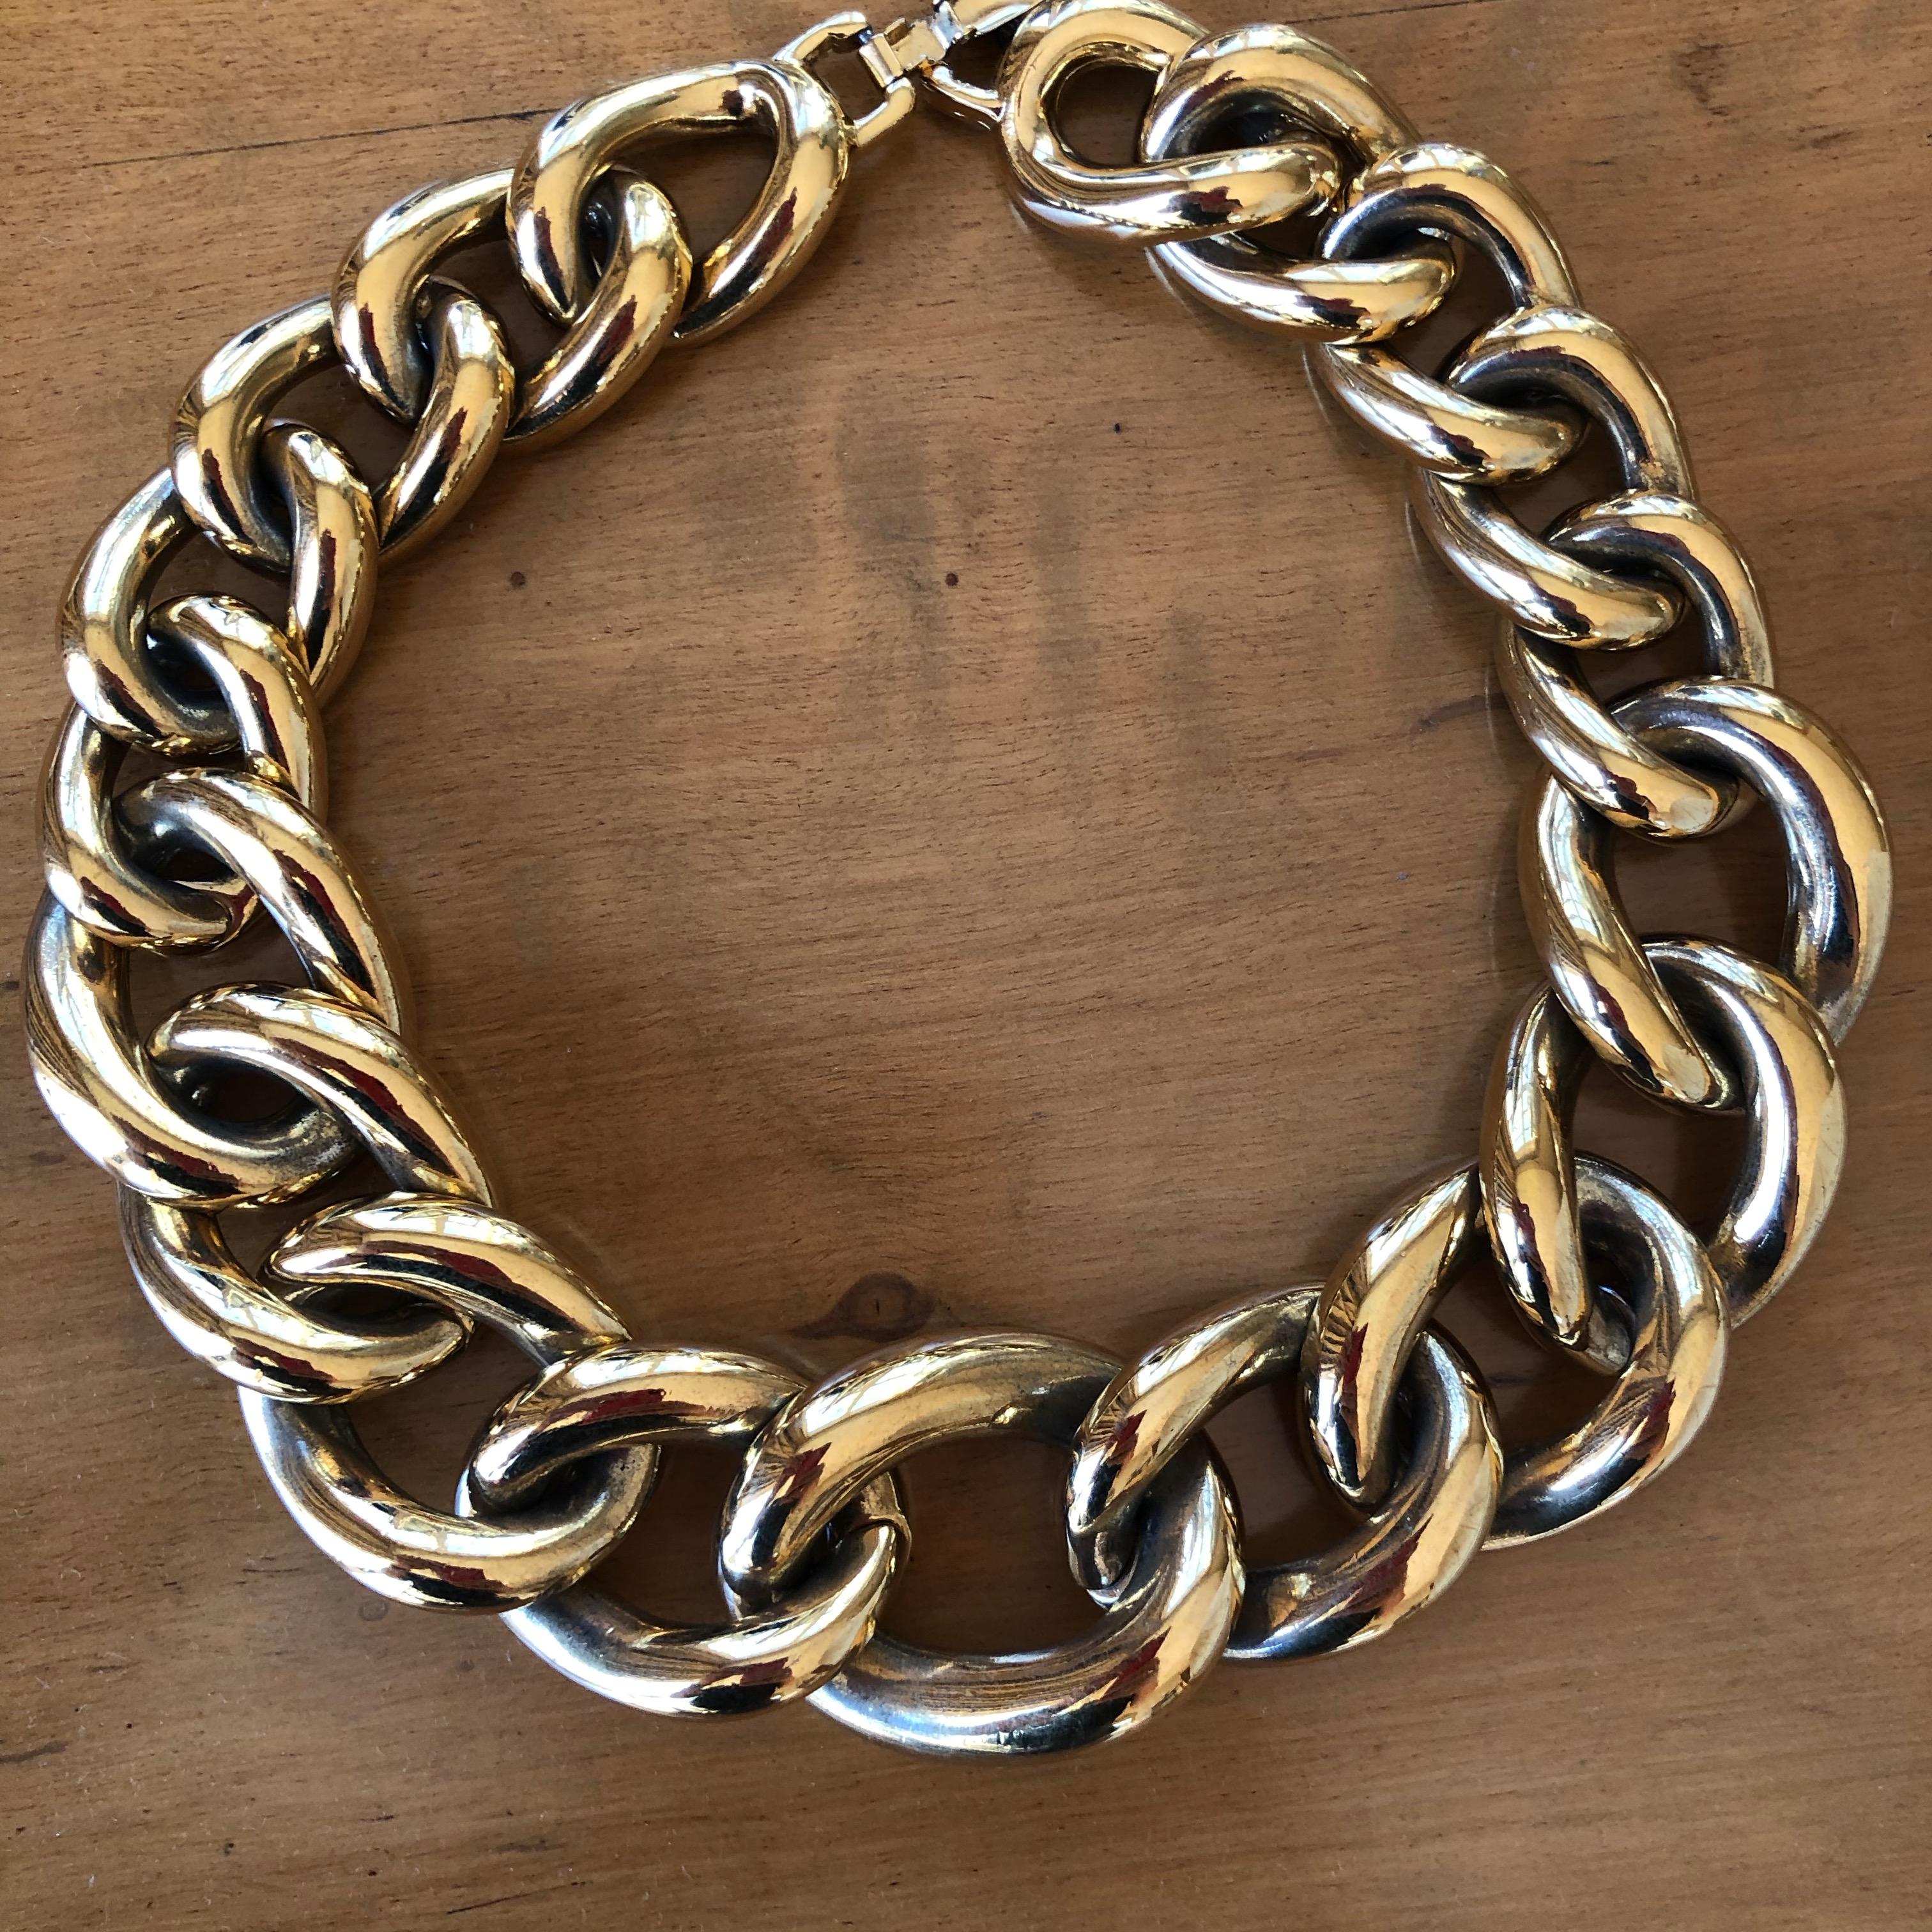 Givenchy Massive Vintage Bold Gold Link Necklace
Foldover clasp.
Made in France
17